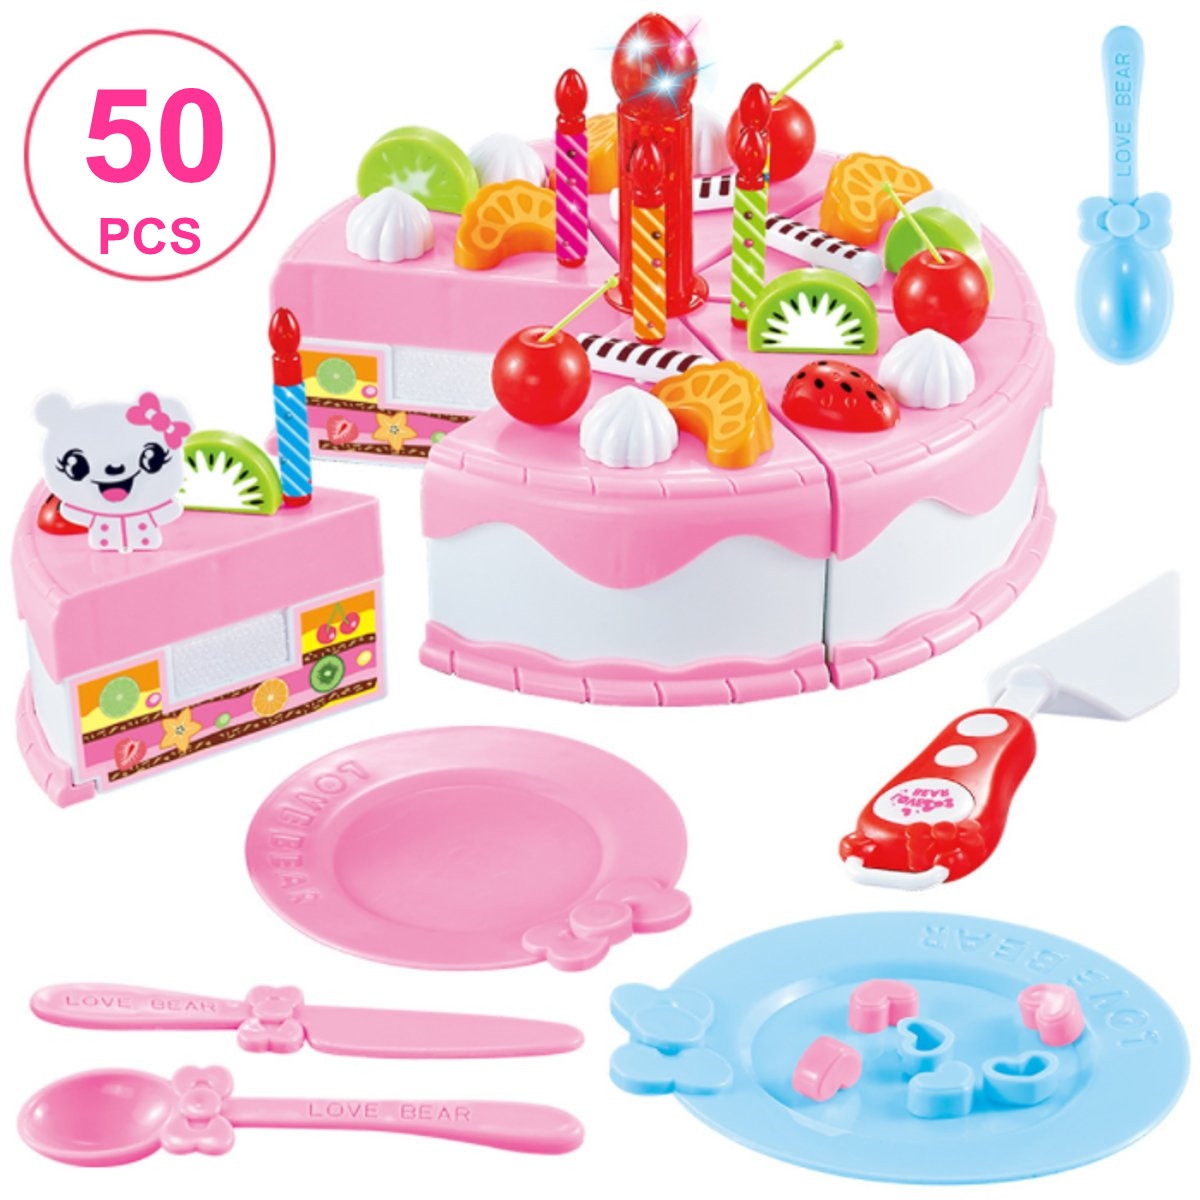 50/66/80PCS Kid DIY Role Play Colorful Birthday Cake Toys with Light for Kids Gift